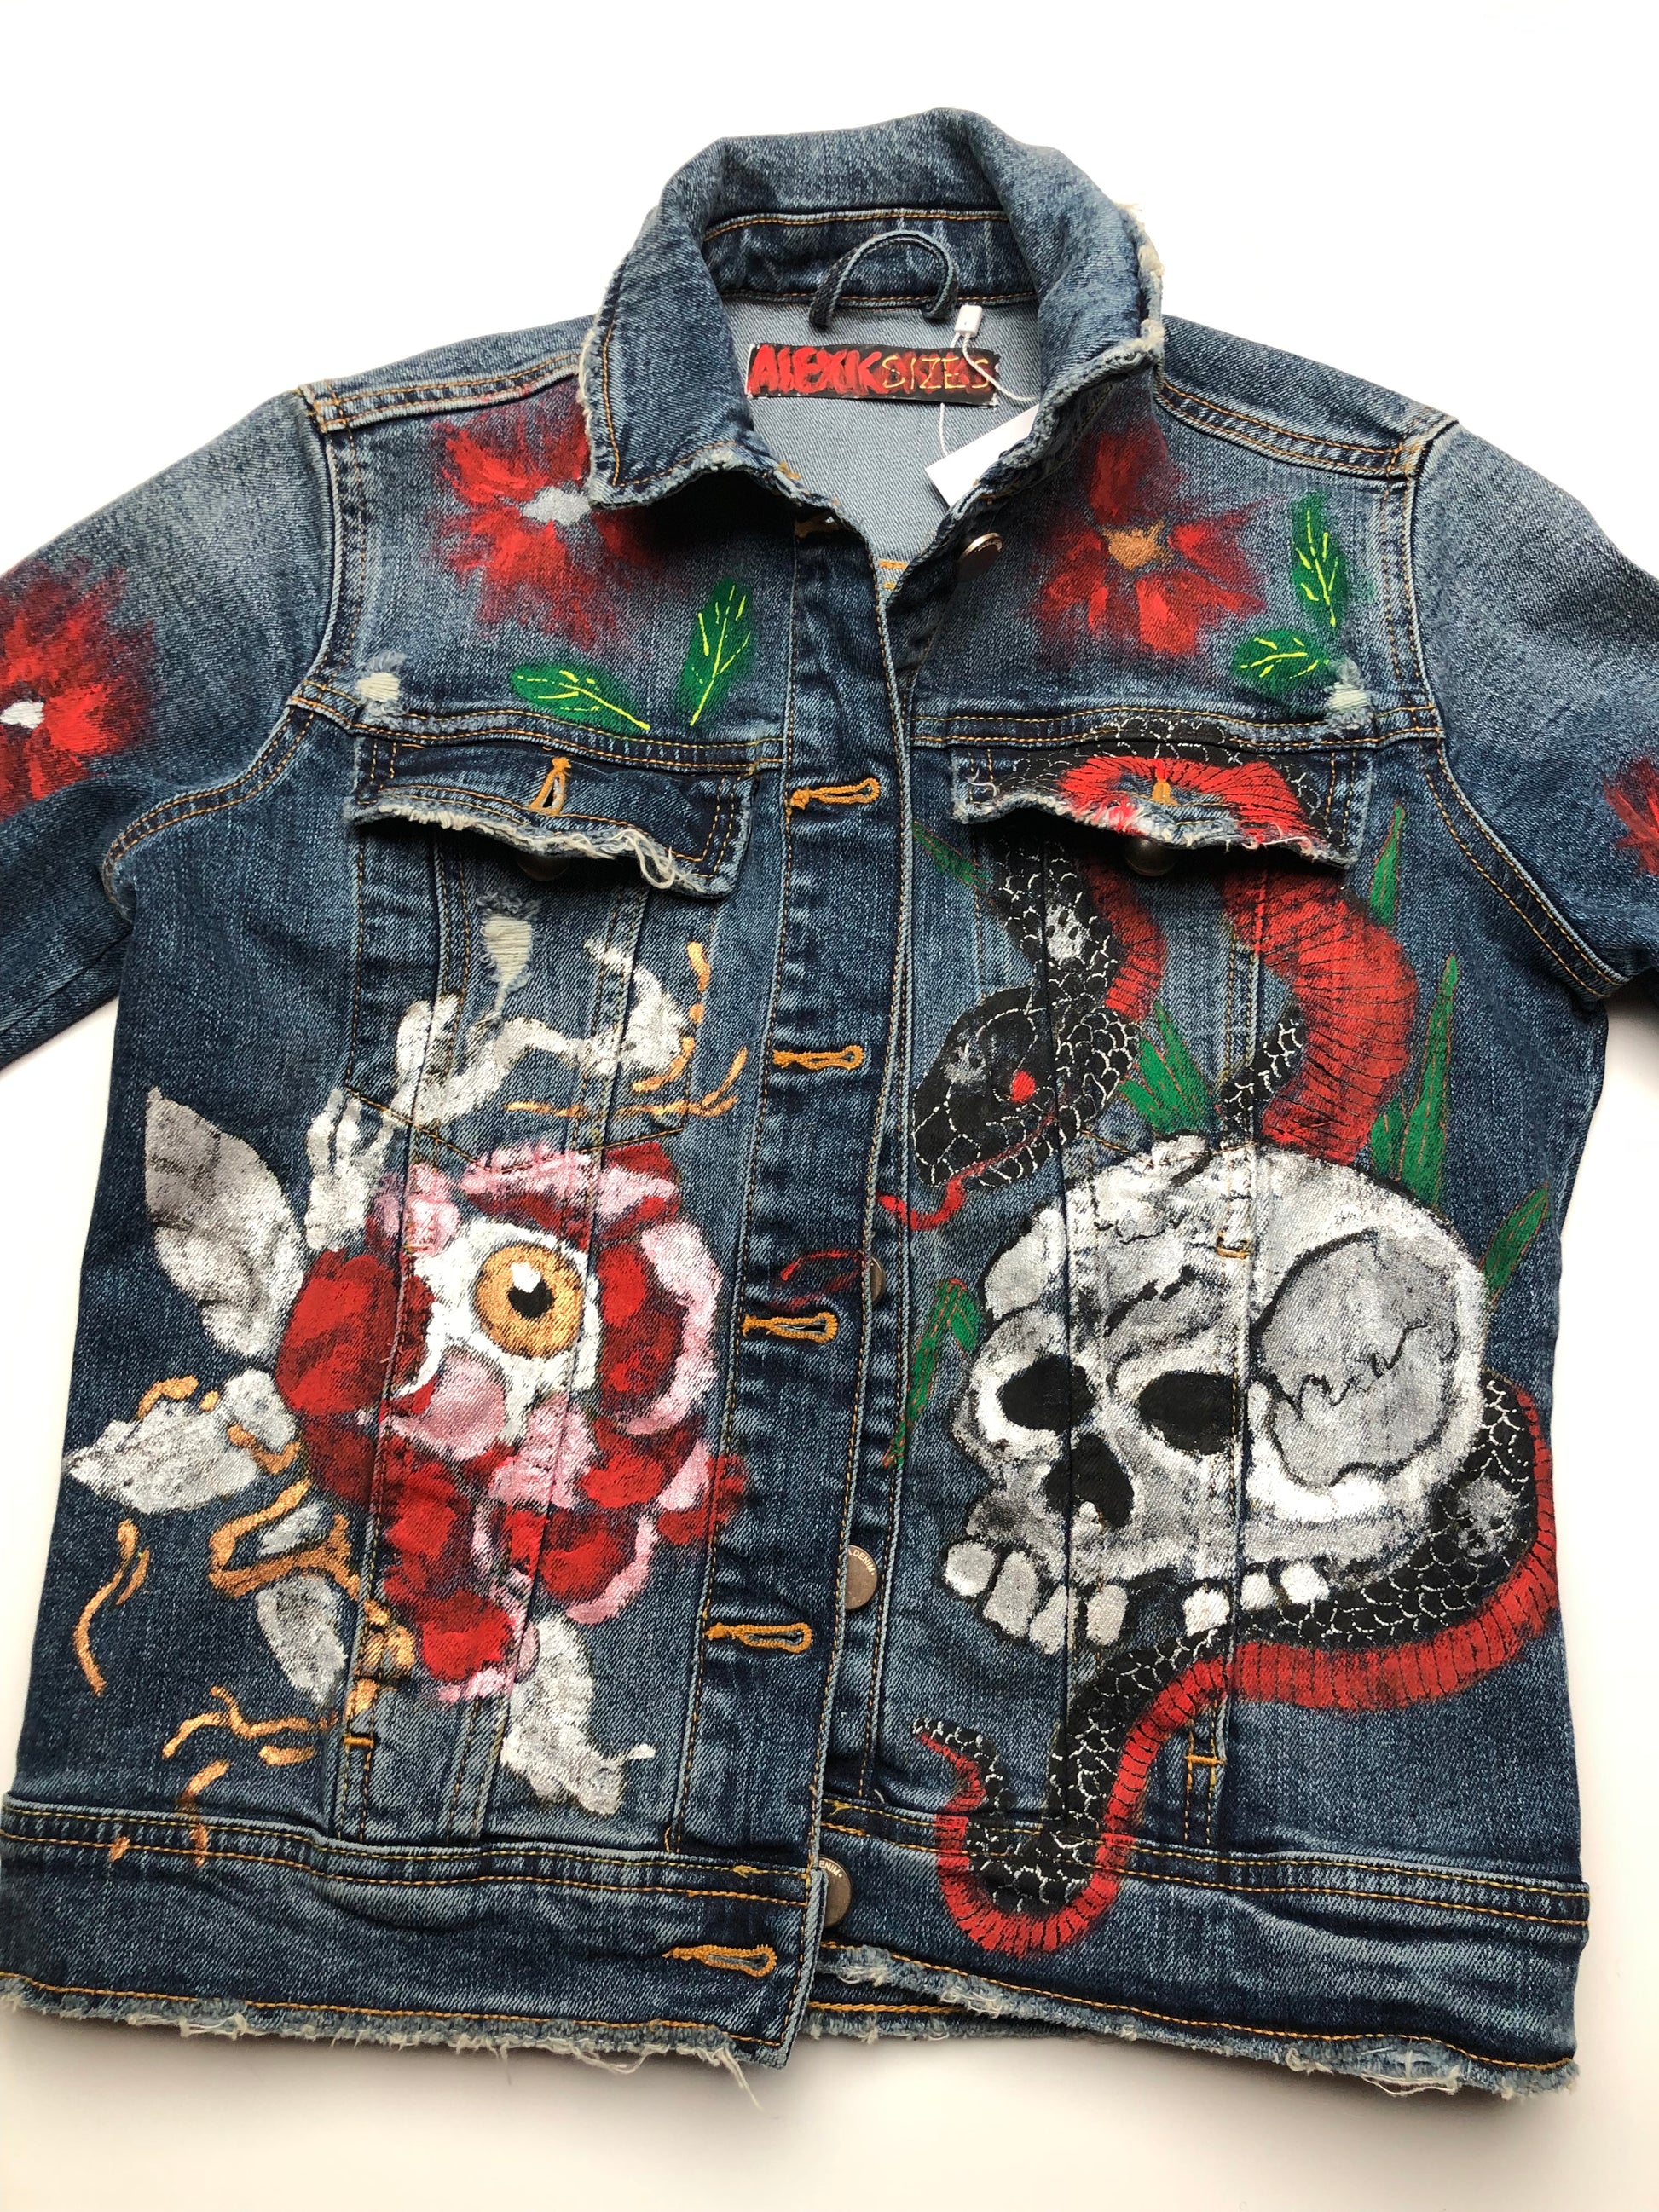 Women's denim jacket shooter. For ladies, a fancy jacket hand-painted